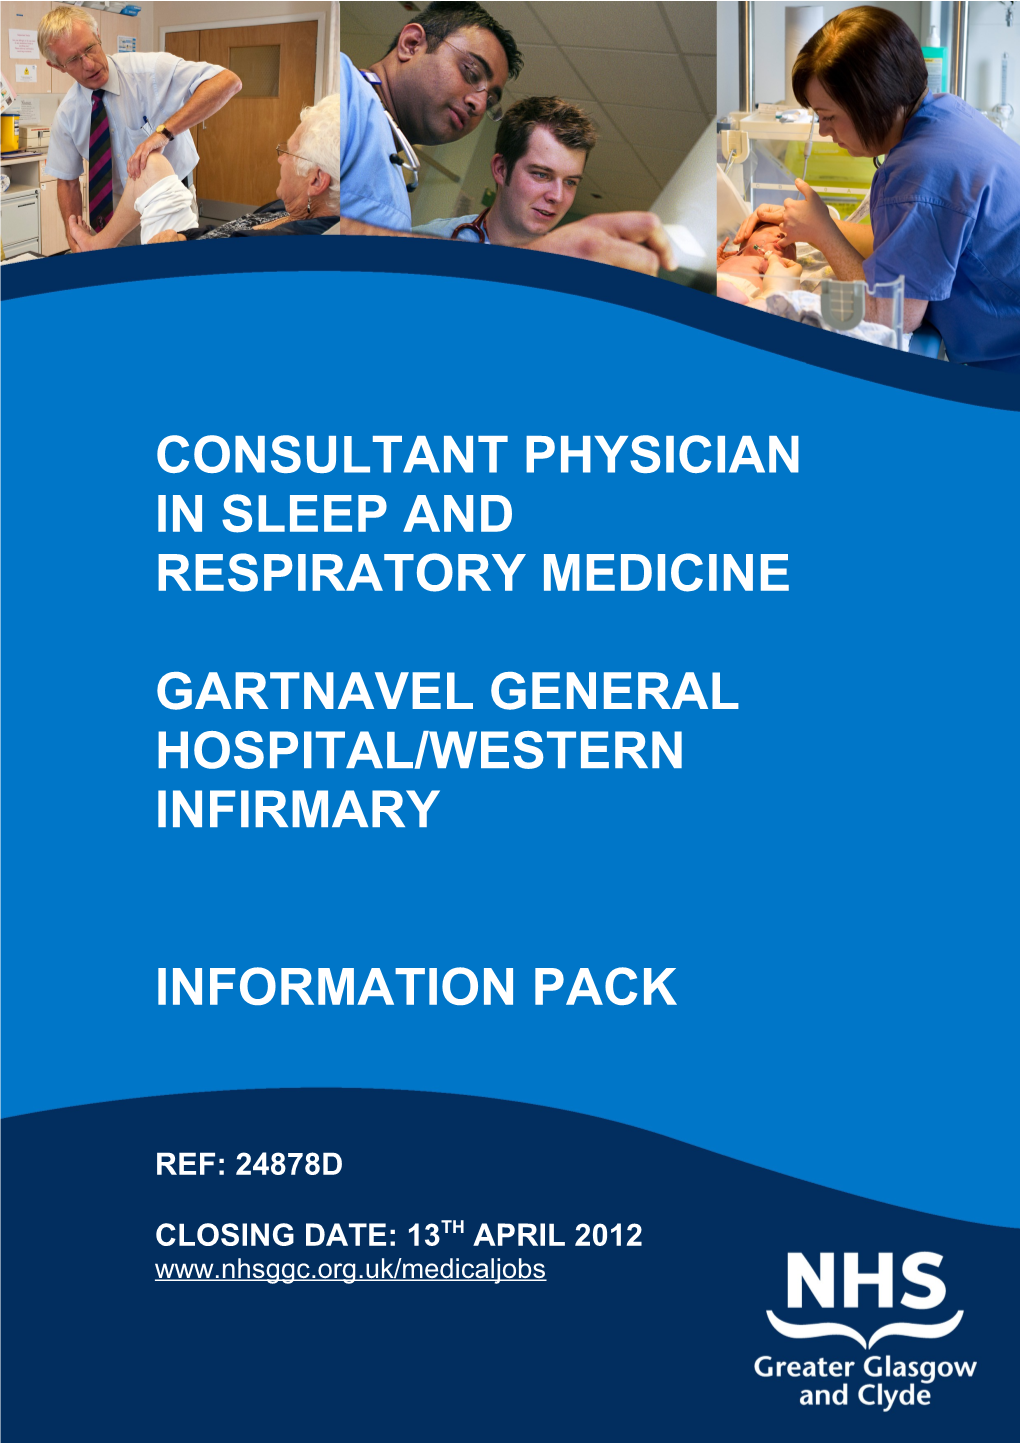 Consultant Physician in Sleep and Respiratory Medicine